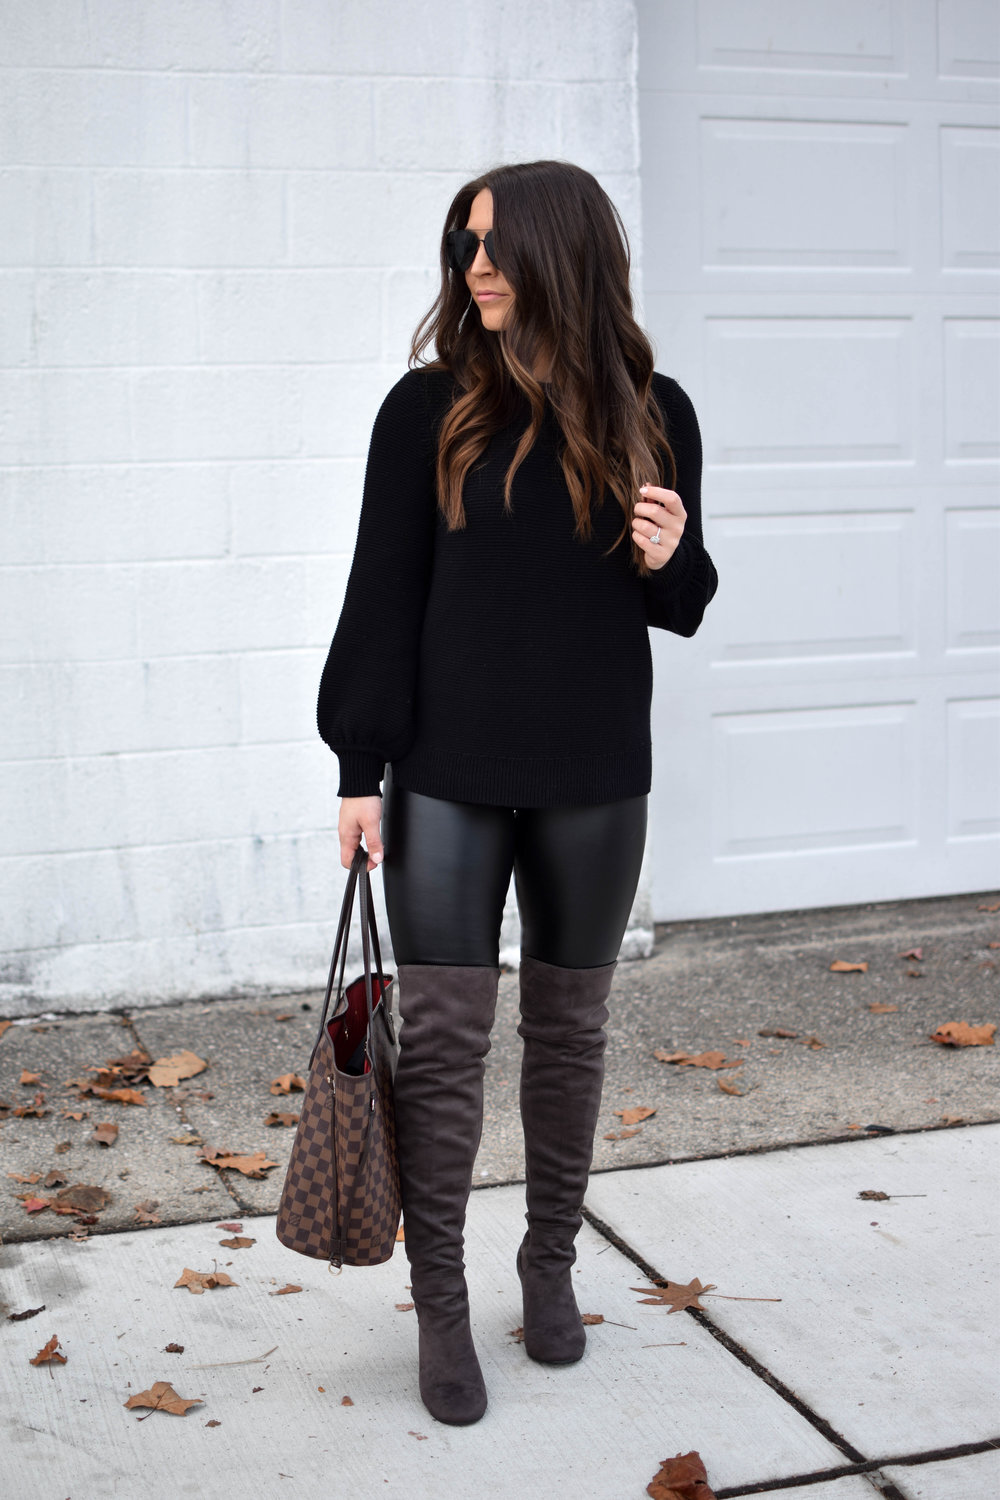 Leather Leggings Outfit Winter Boots